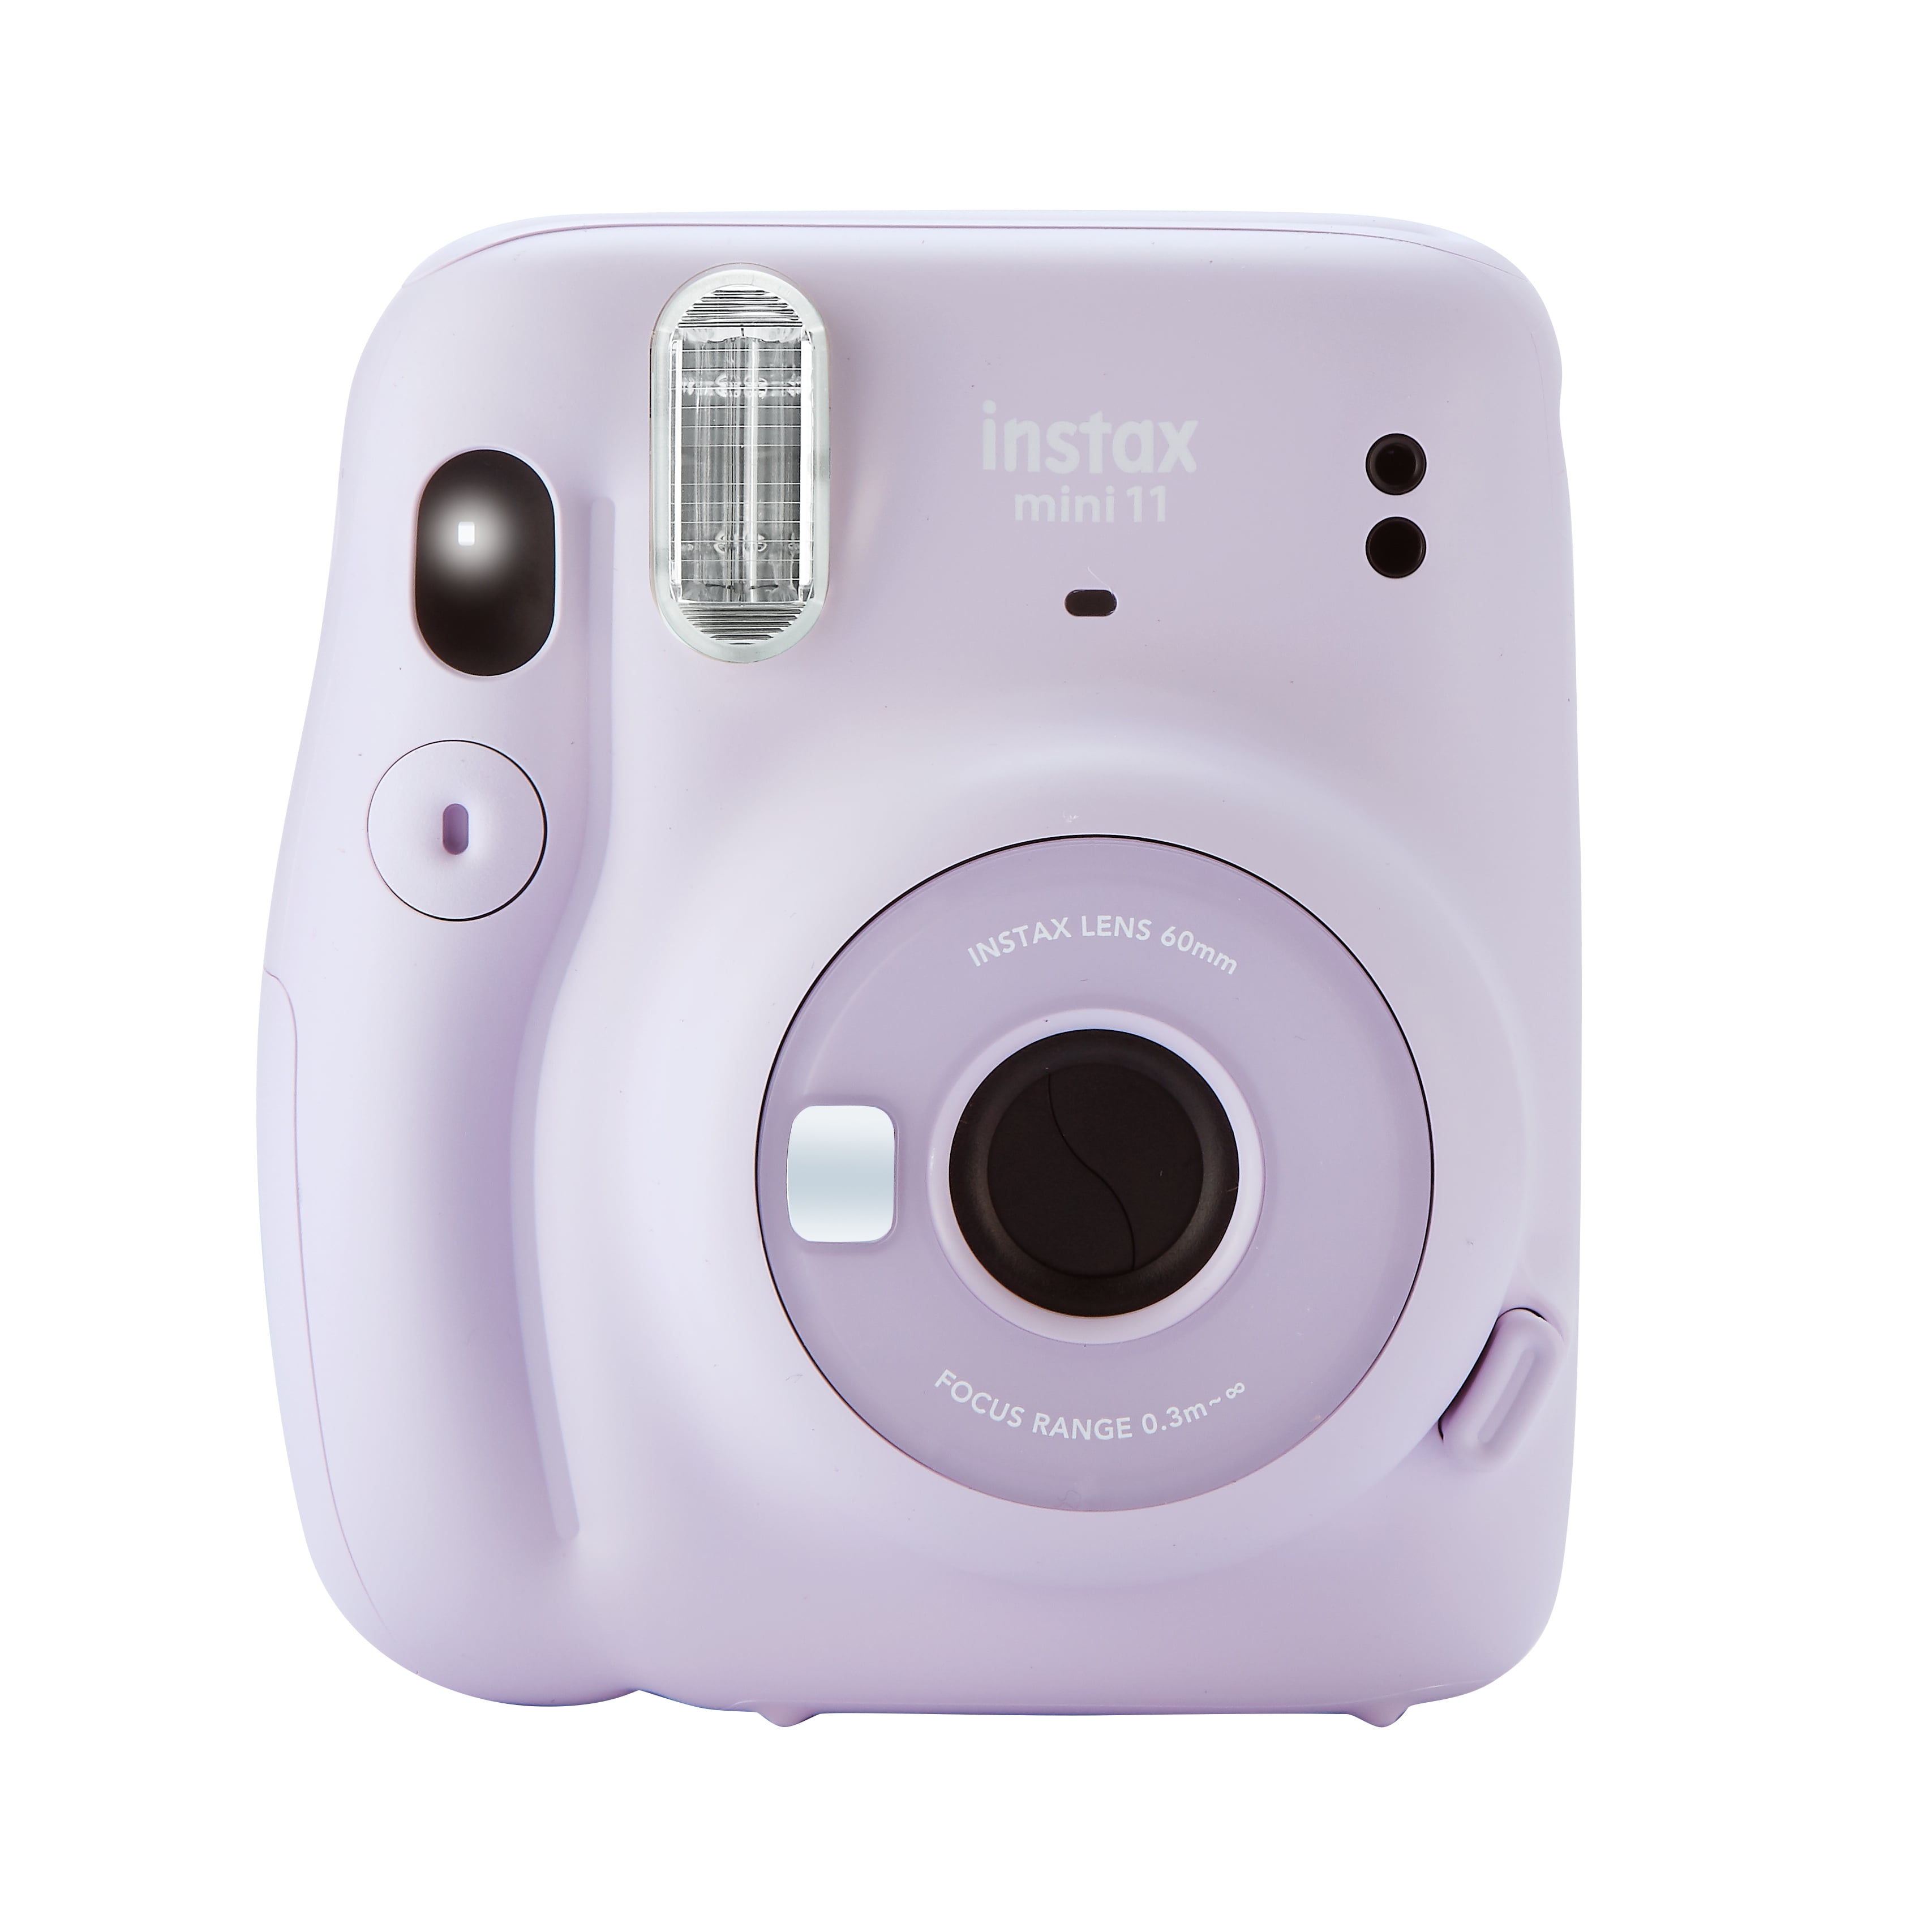  Fujifilm Instax Mini 11 Instant Camera Lilac Purple + Fuji  Film Value Pack (40 Sheets) + Shutter Accessories Bundle, Incl. Compatible  Carrying Case, Quicksand Beads Photo Album 64 Pockets : Electronics